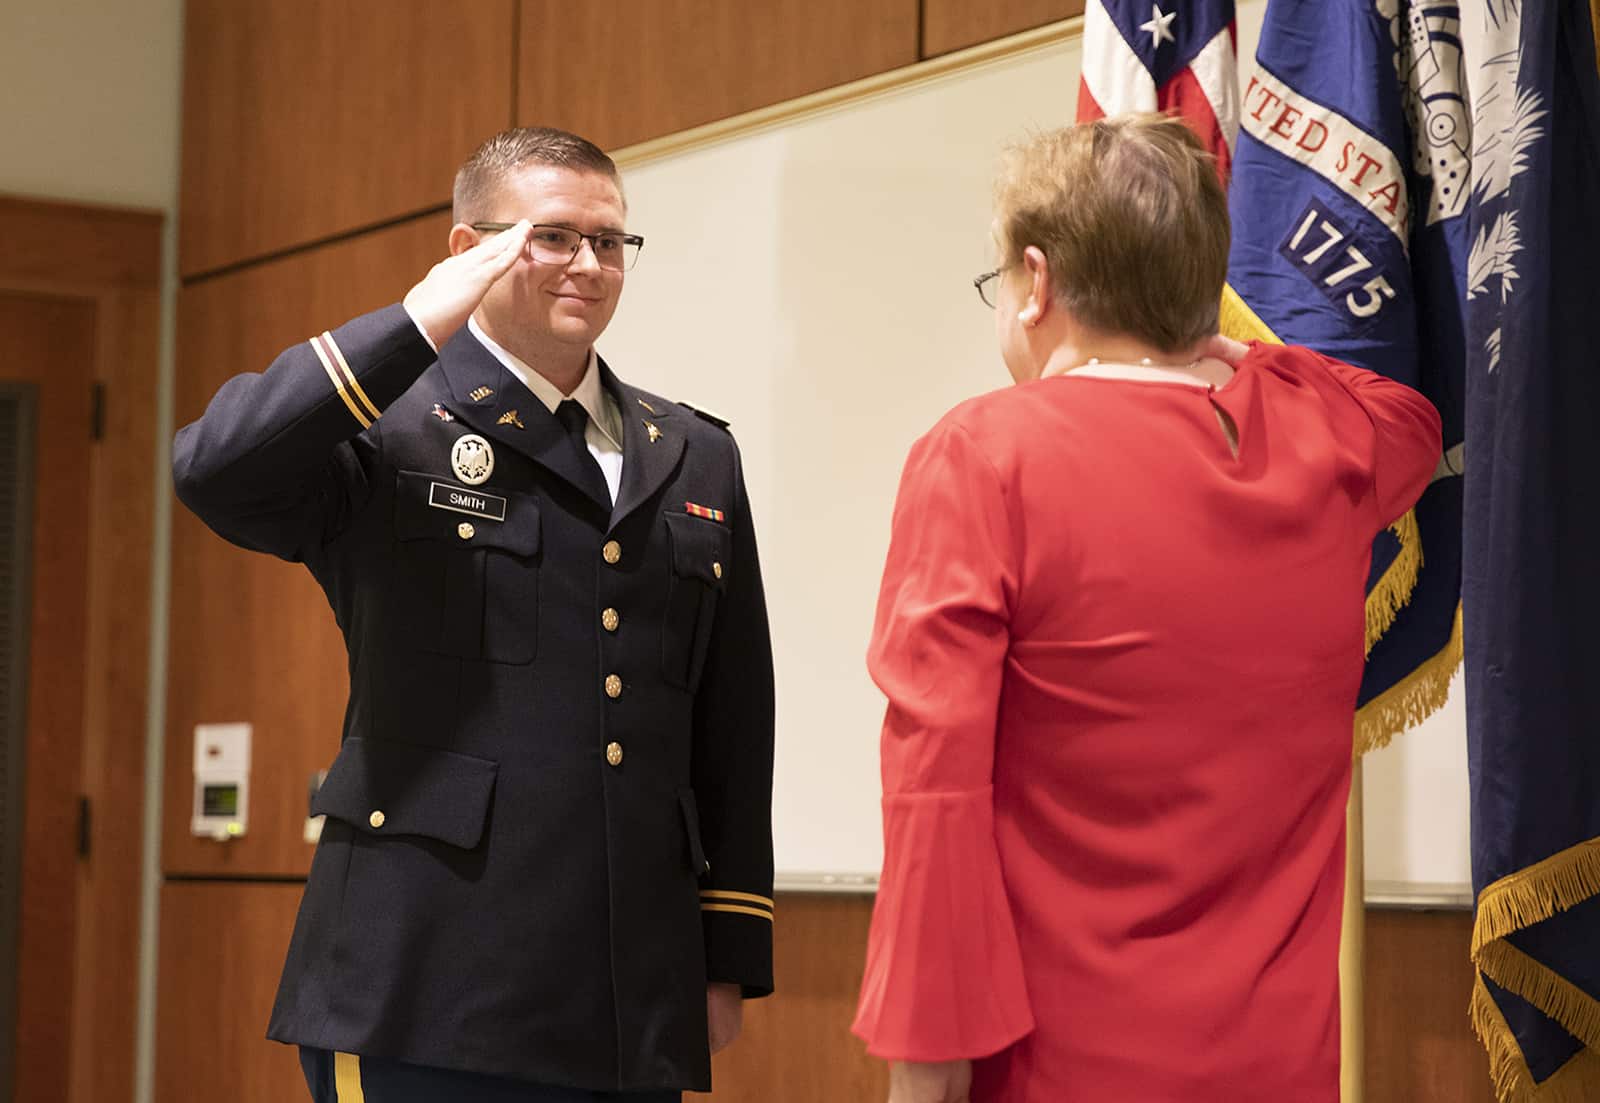 Medicine and military combine for two new officers, FMU grads 